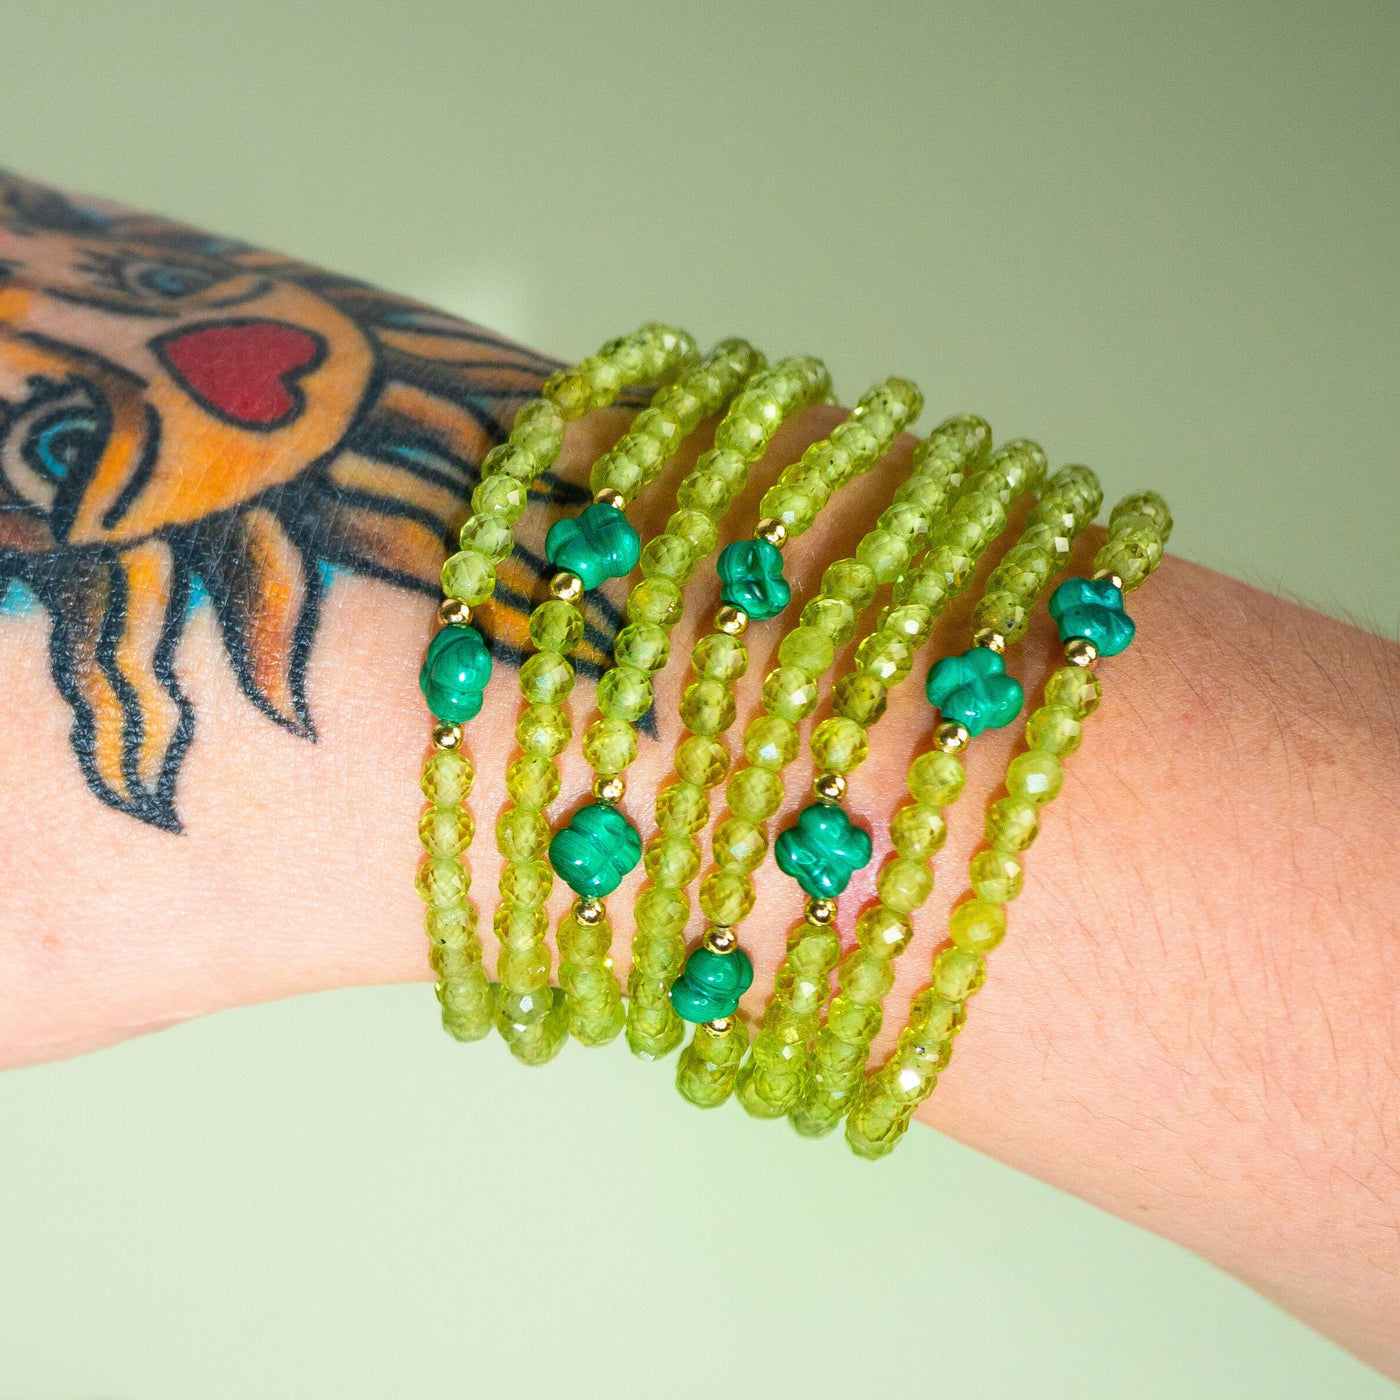 White woman with tarot sun hand tattoo wearing 8 Opportunity Magnet peridot and malachite crystal stretch elastic bracelets by Energy Muse